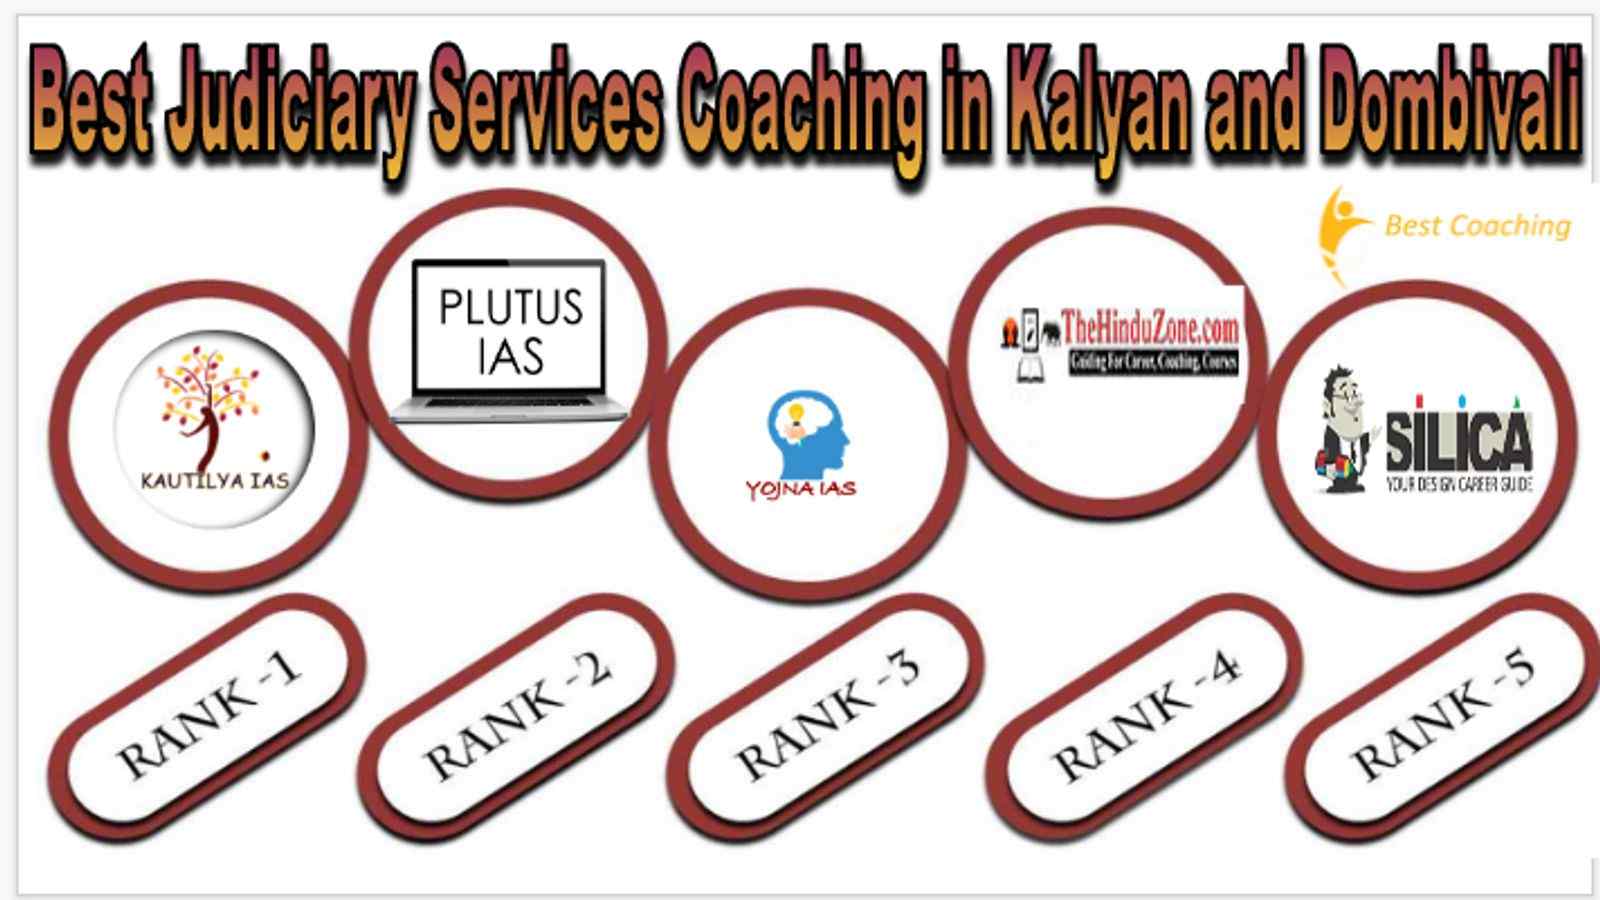 Best Judiciary Services Coaching in Kalyan and Dombivali